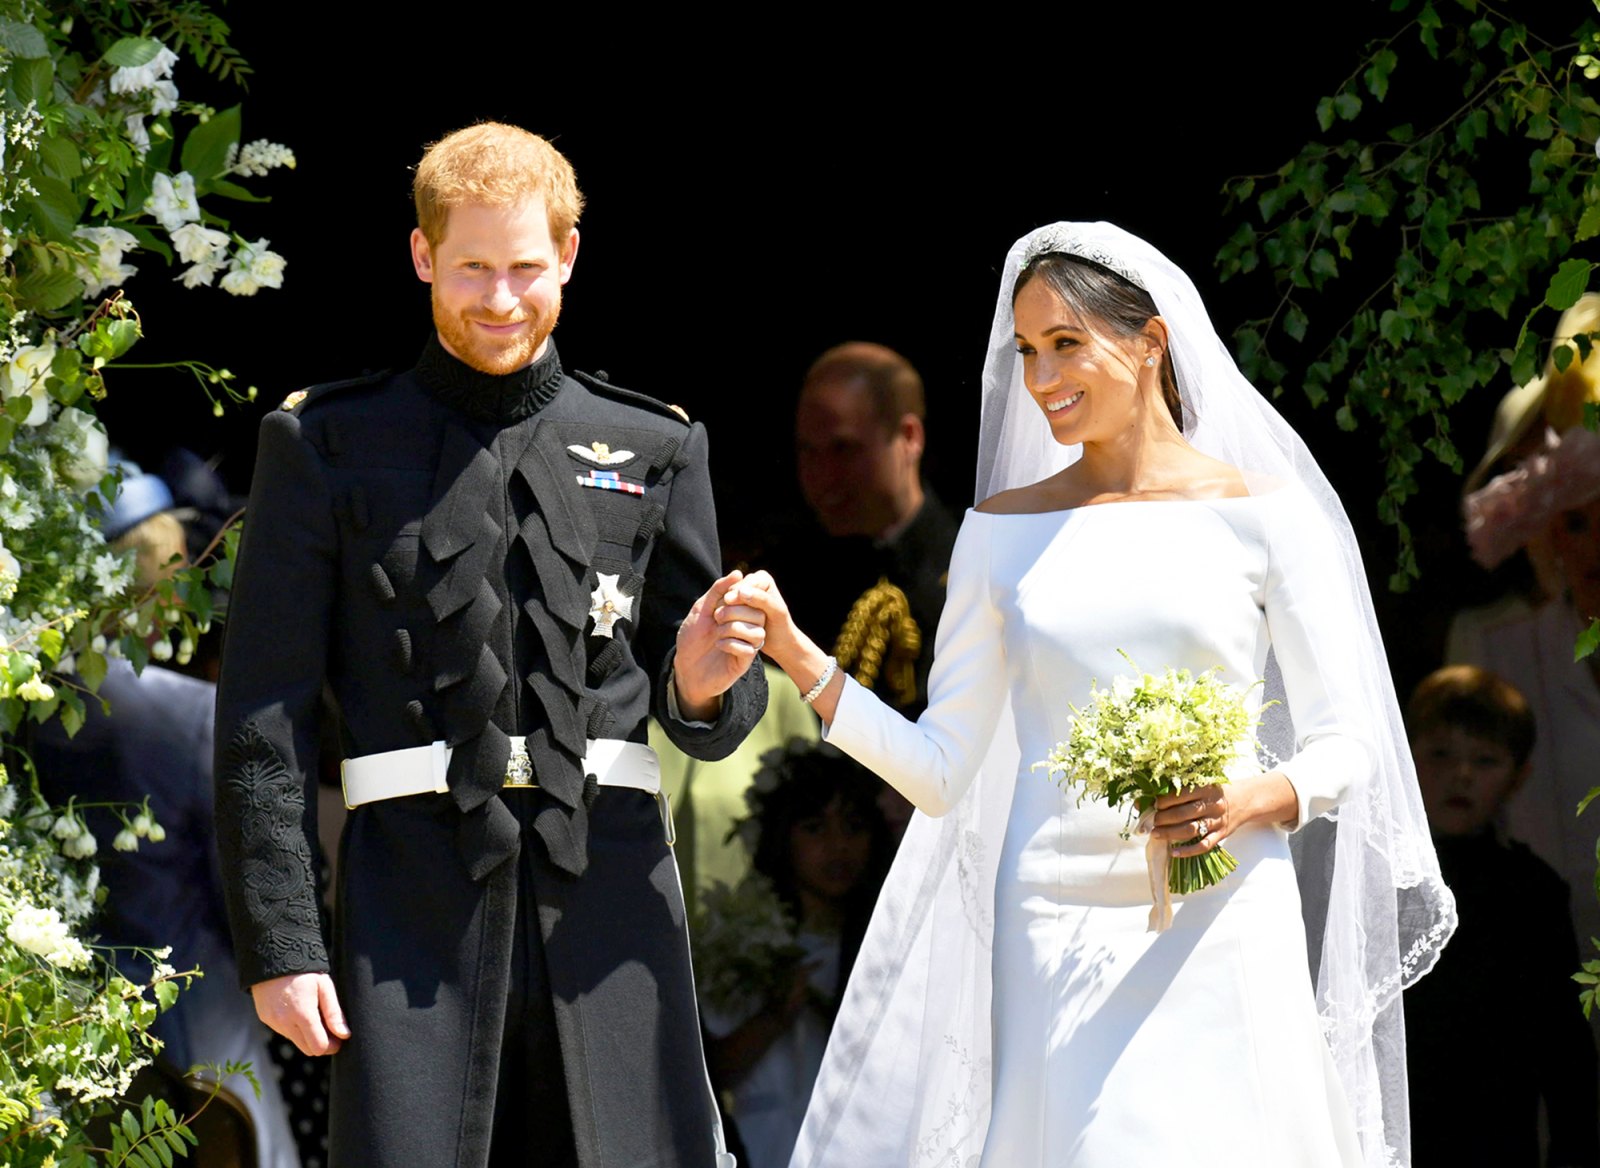 Prince Harry and Meghan Markle leave St George's Chapel after their wedding in St George's Chapel at Windsor Castle on May 19, 2018 in Windsor, England.